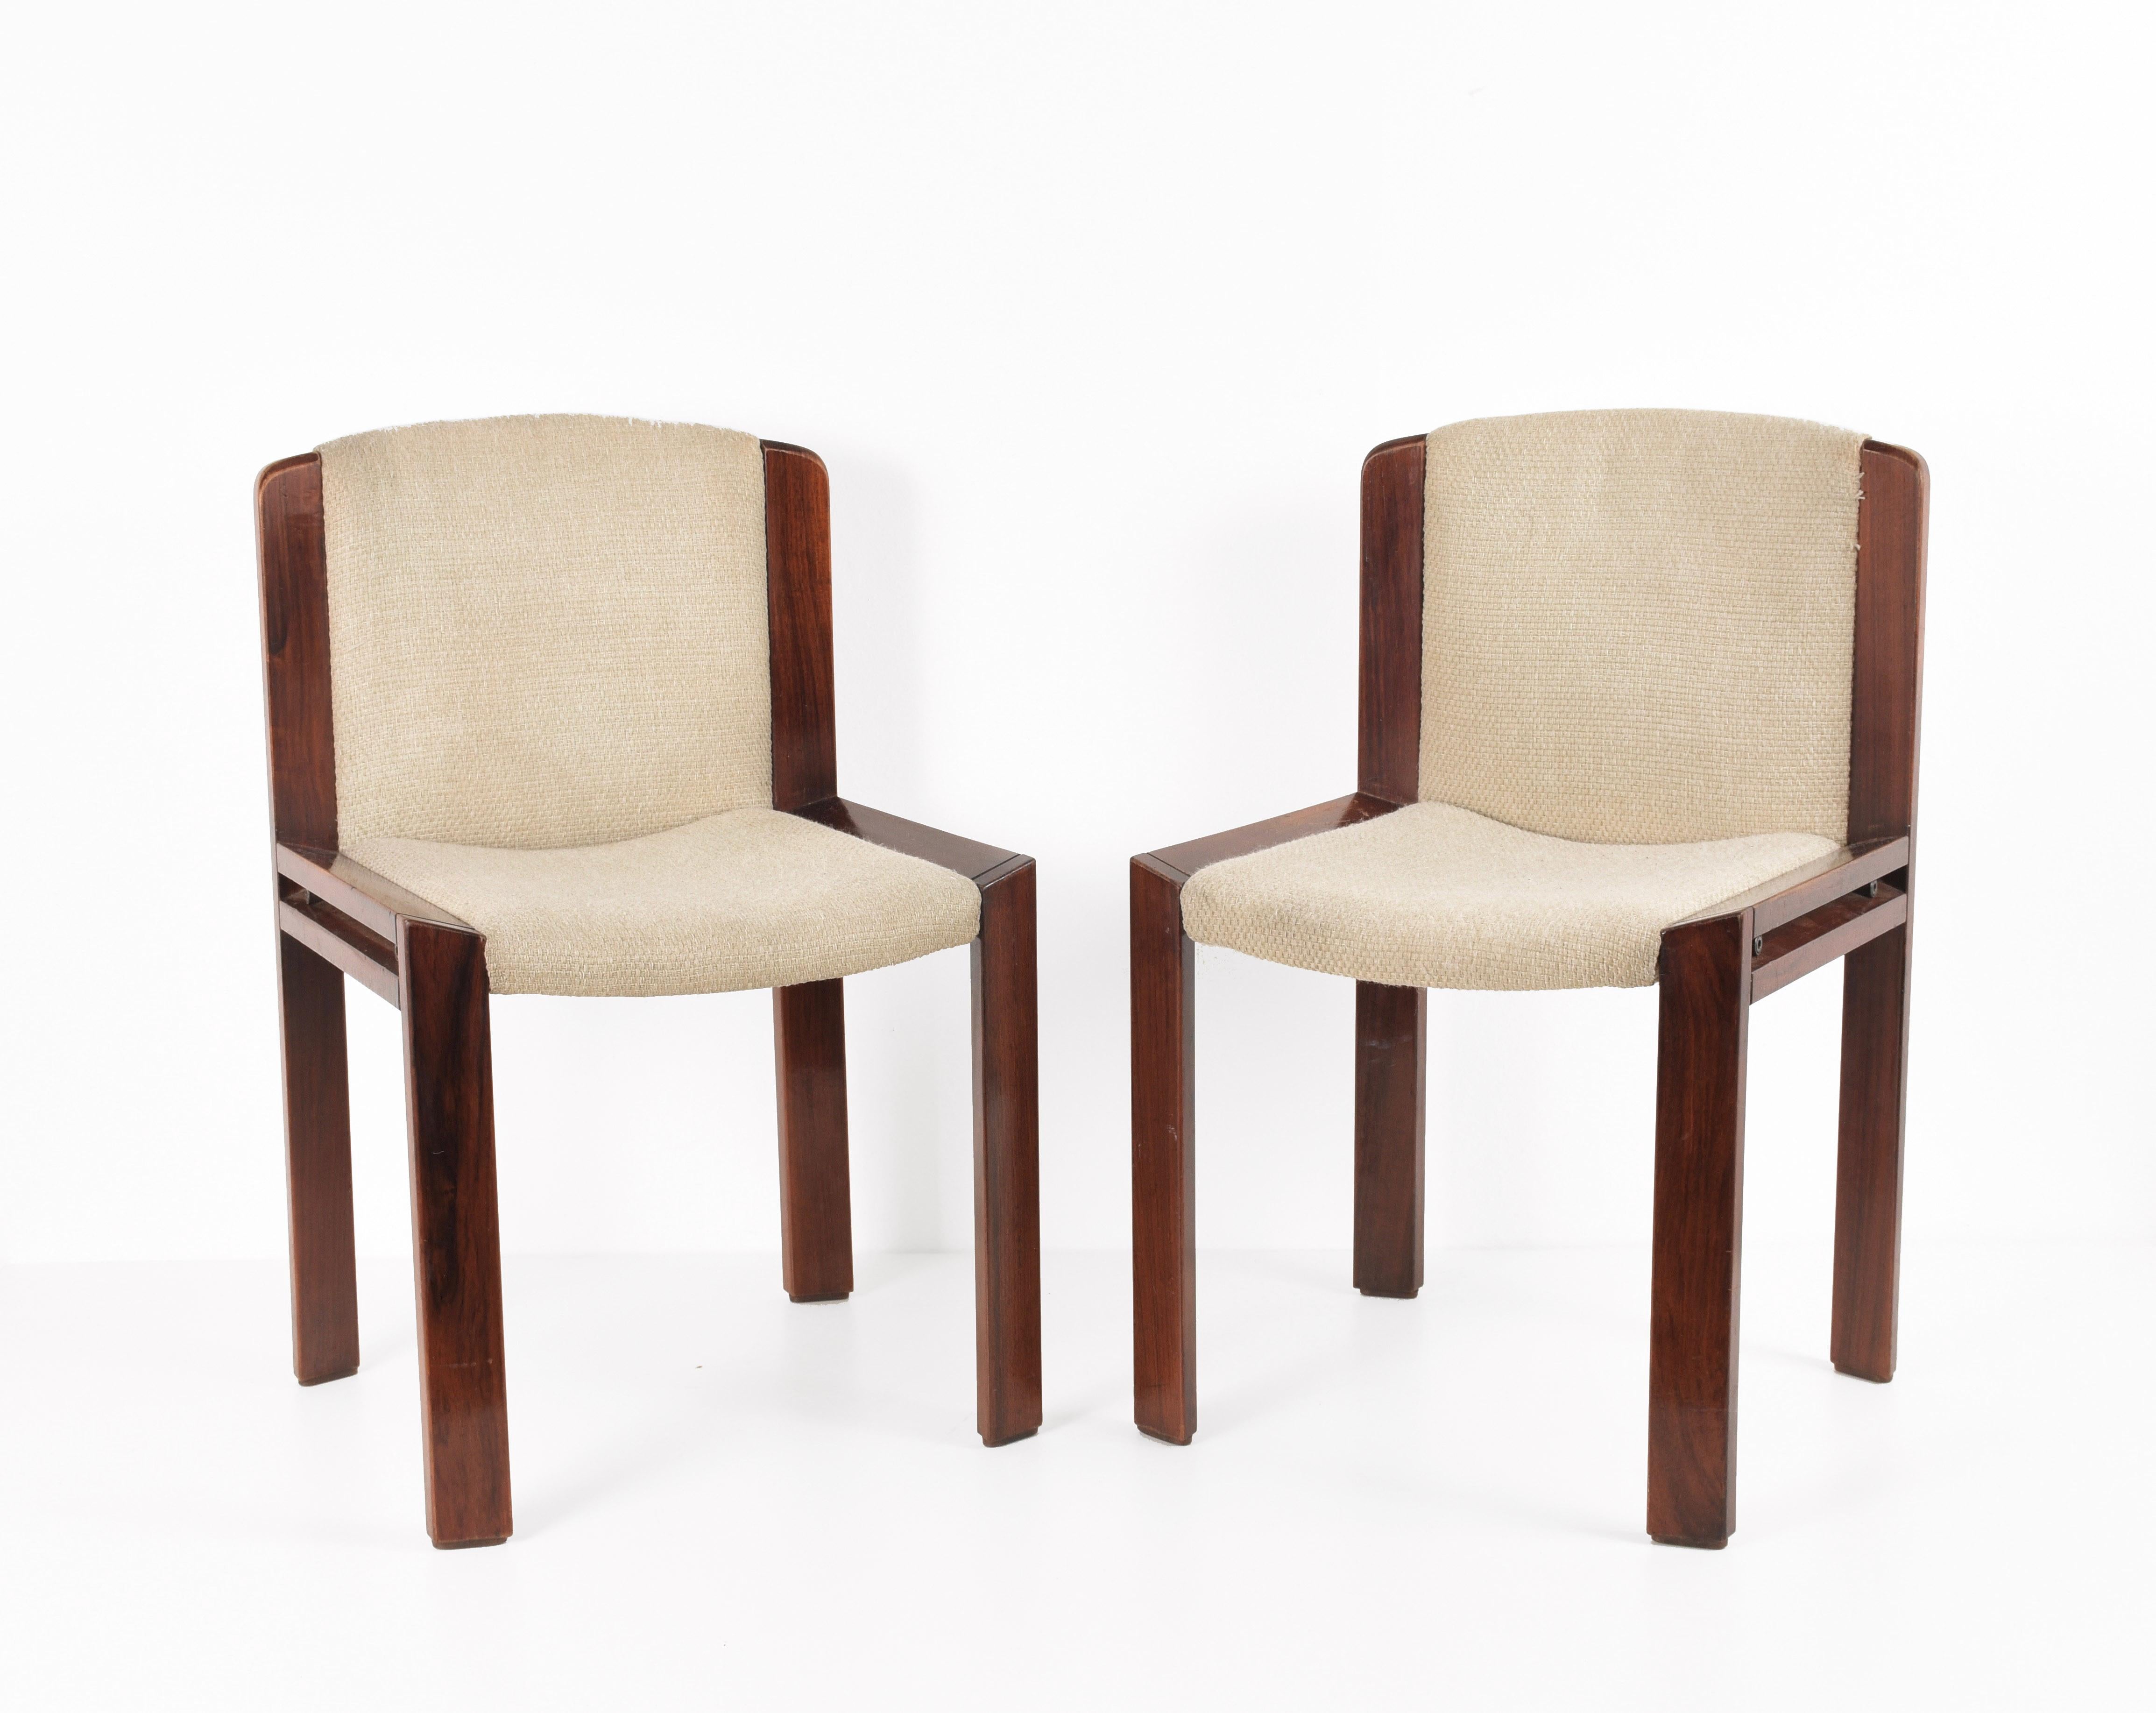 Cotton Set of Six Chairs by Joe Colombo for Pozzi, Solid wood, Italy 1965s